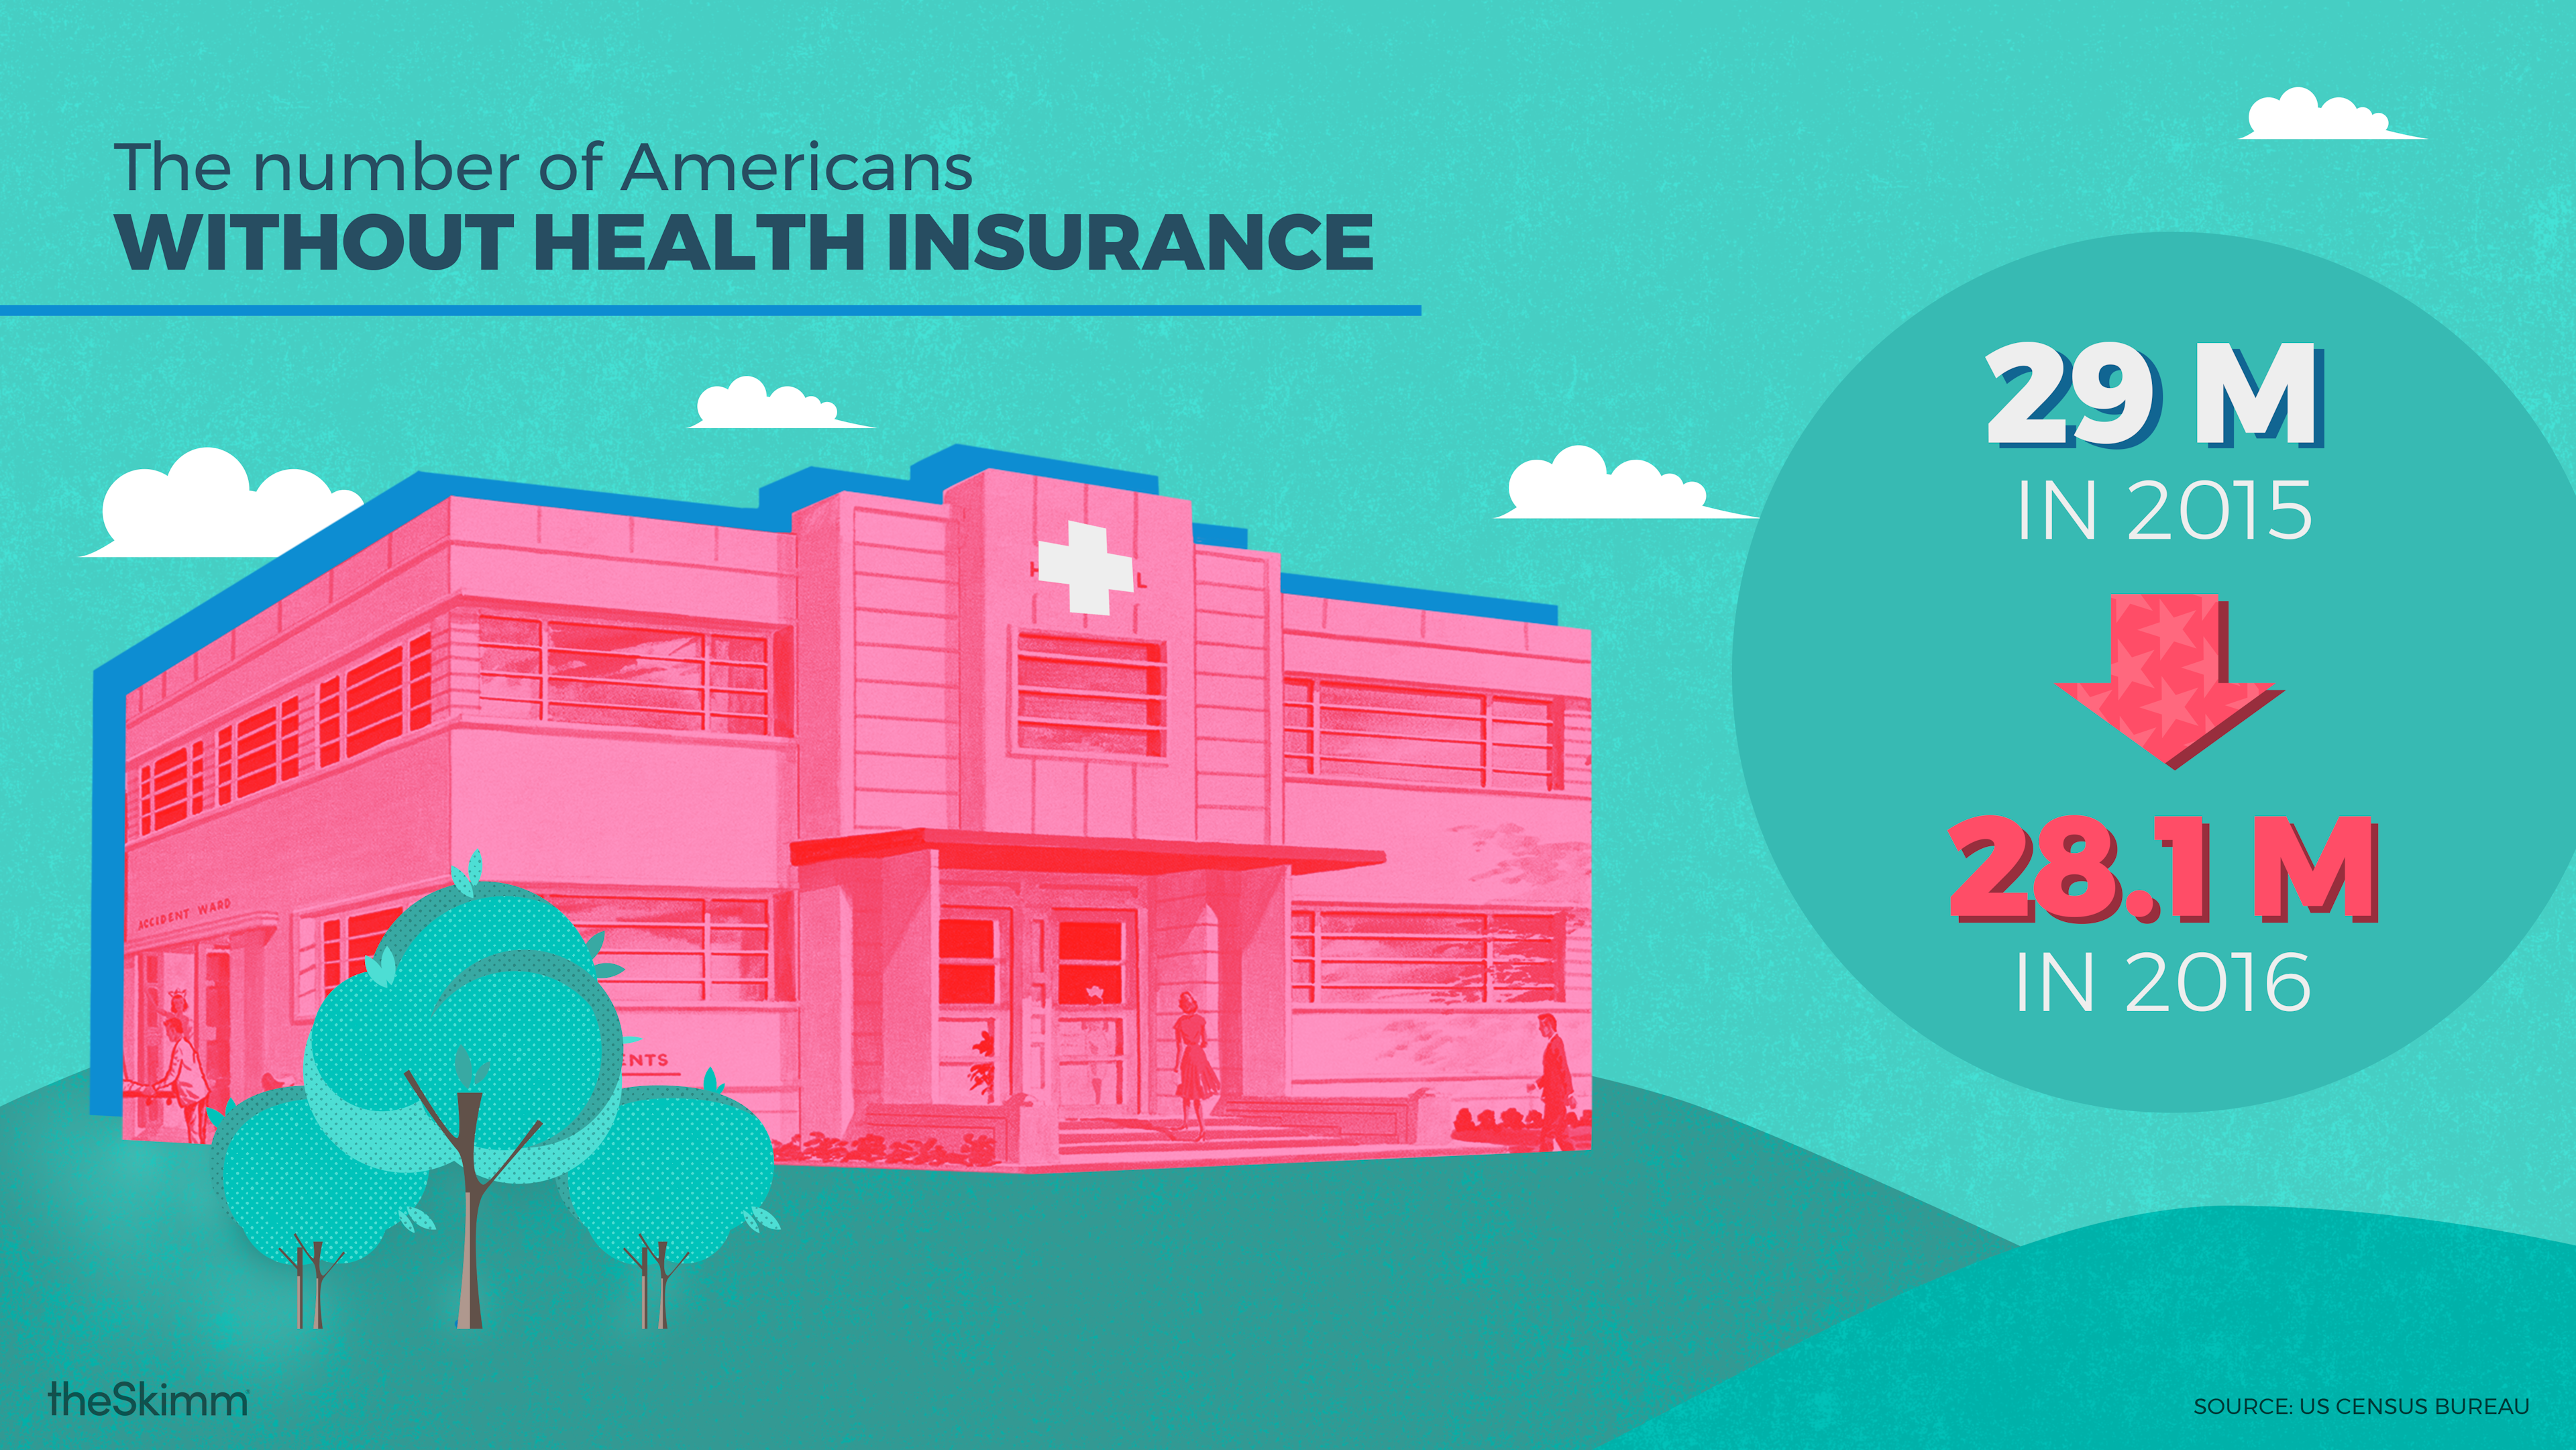 The number of Americans without health insurance. 29M in 2015, down to 28.1M in 2016